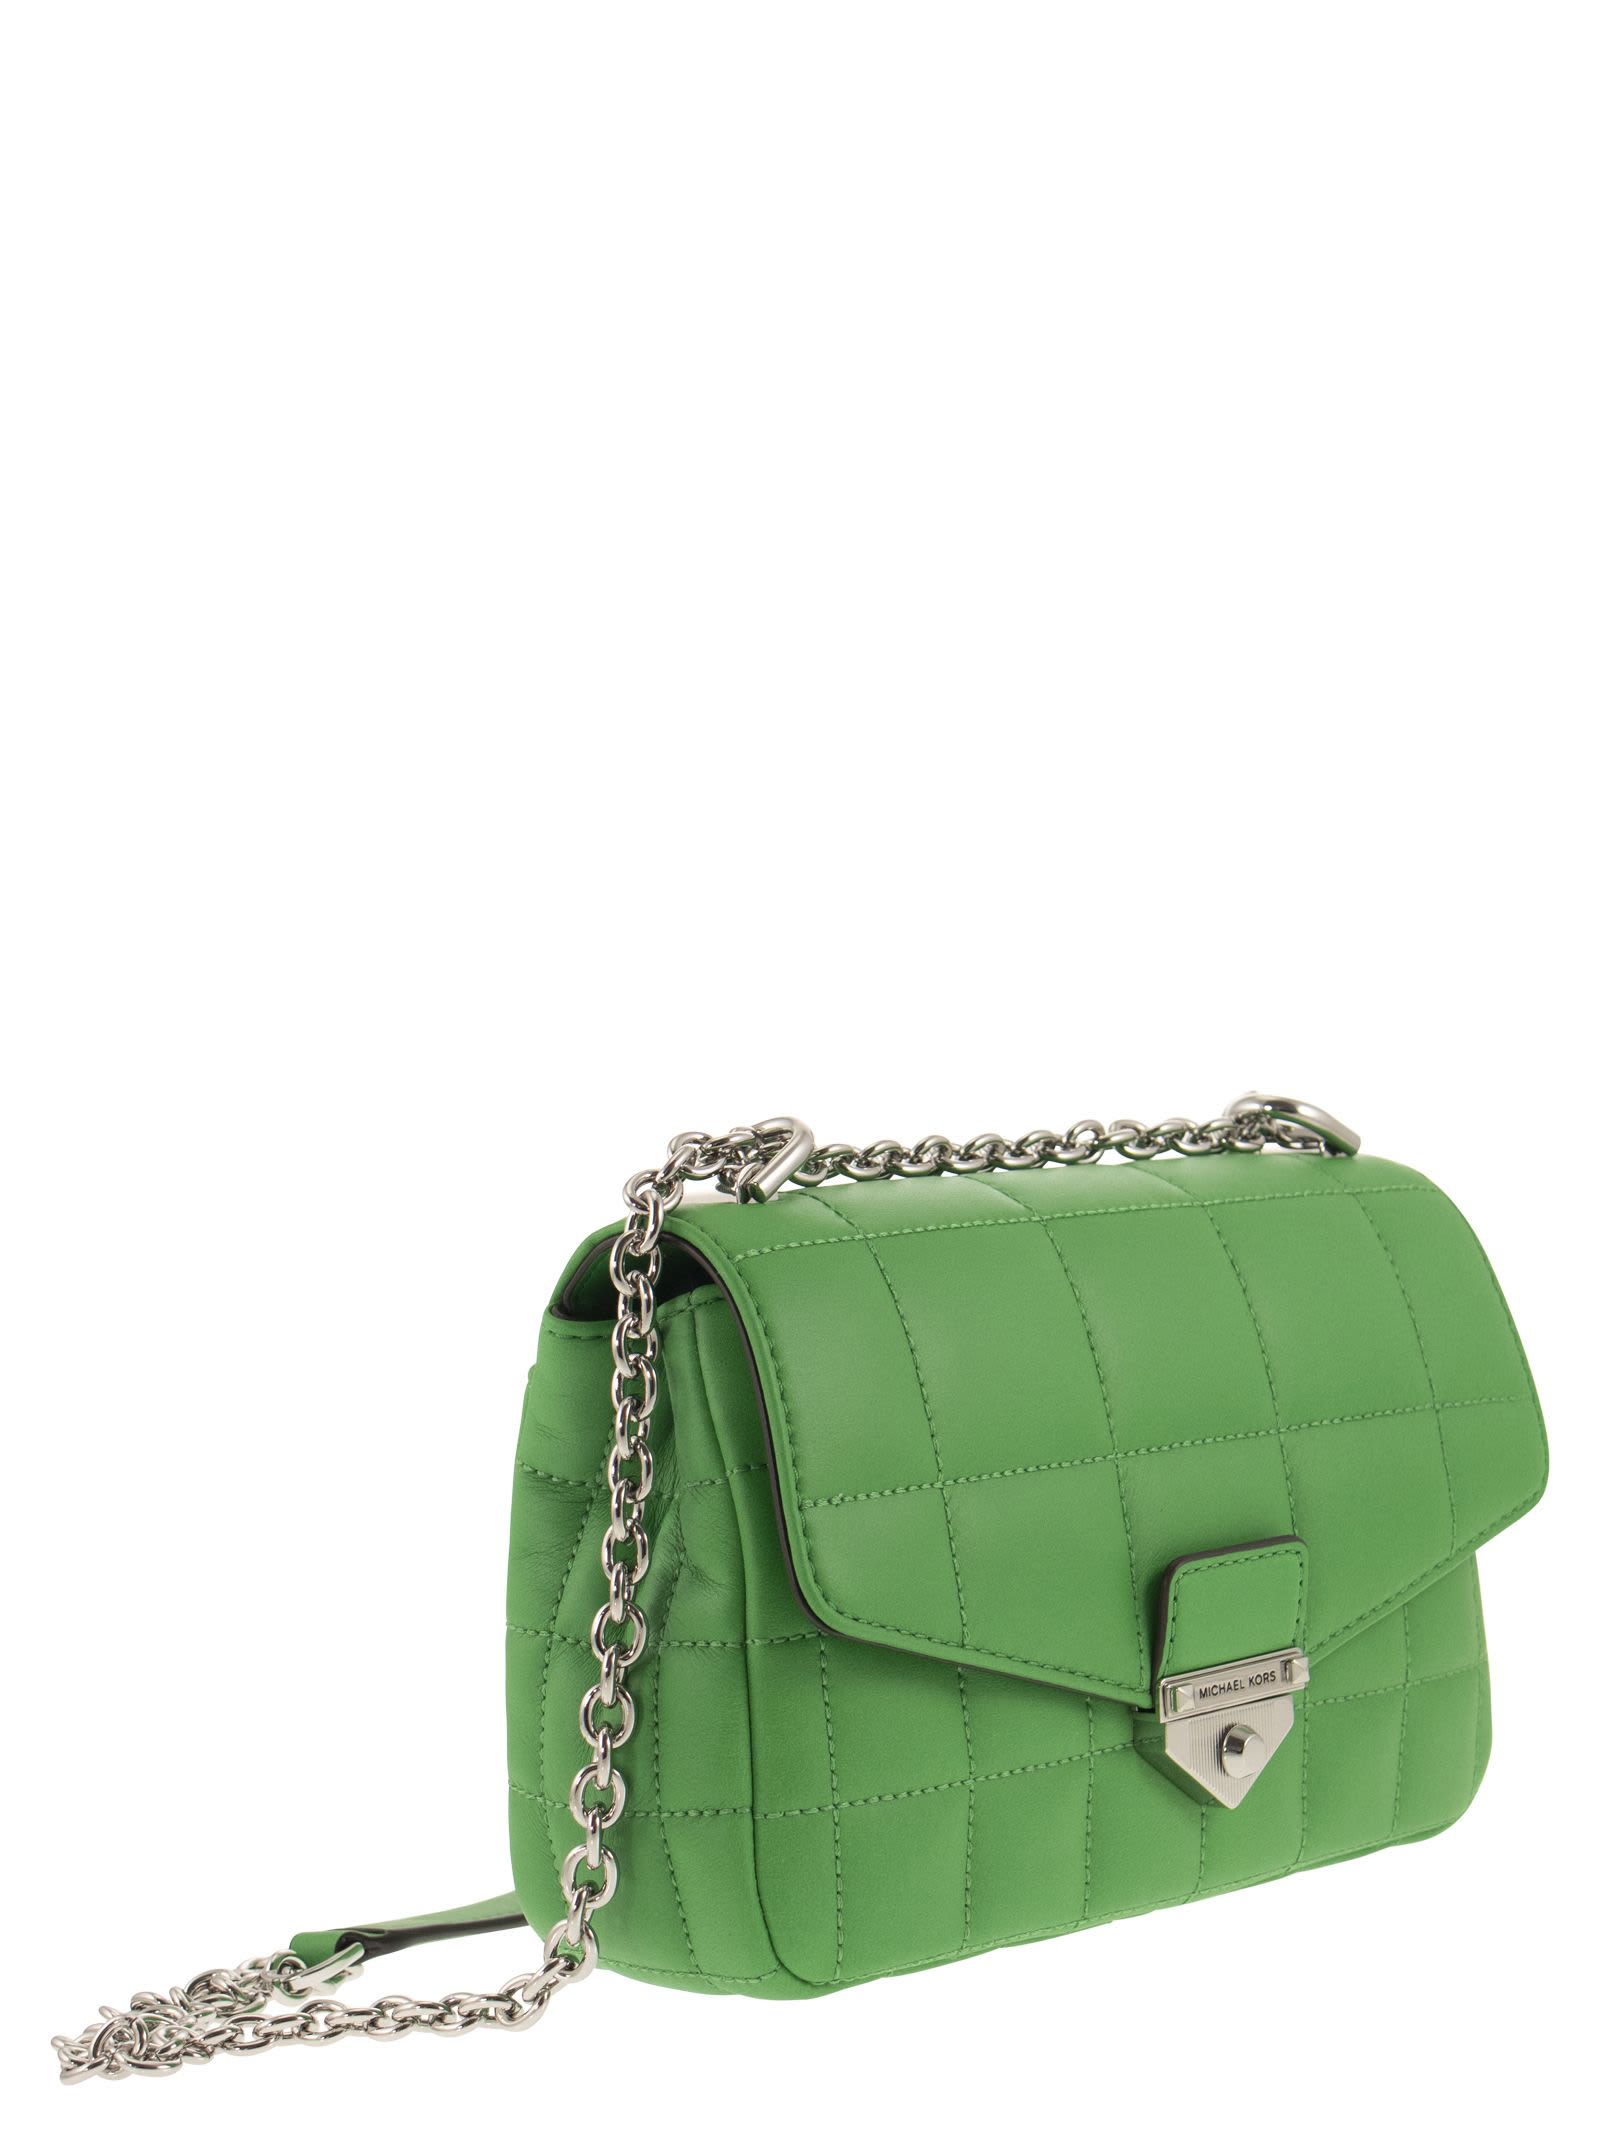 Shop Michael Kors Soho Small Quilted Leather Shoulder Bag In Green